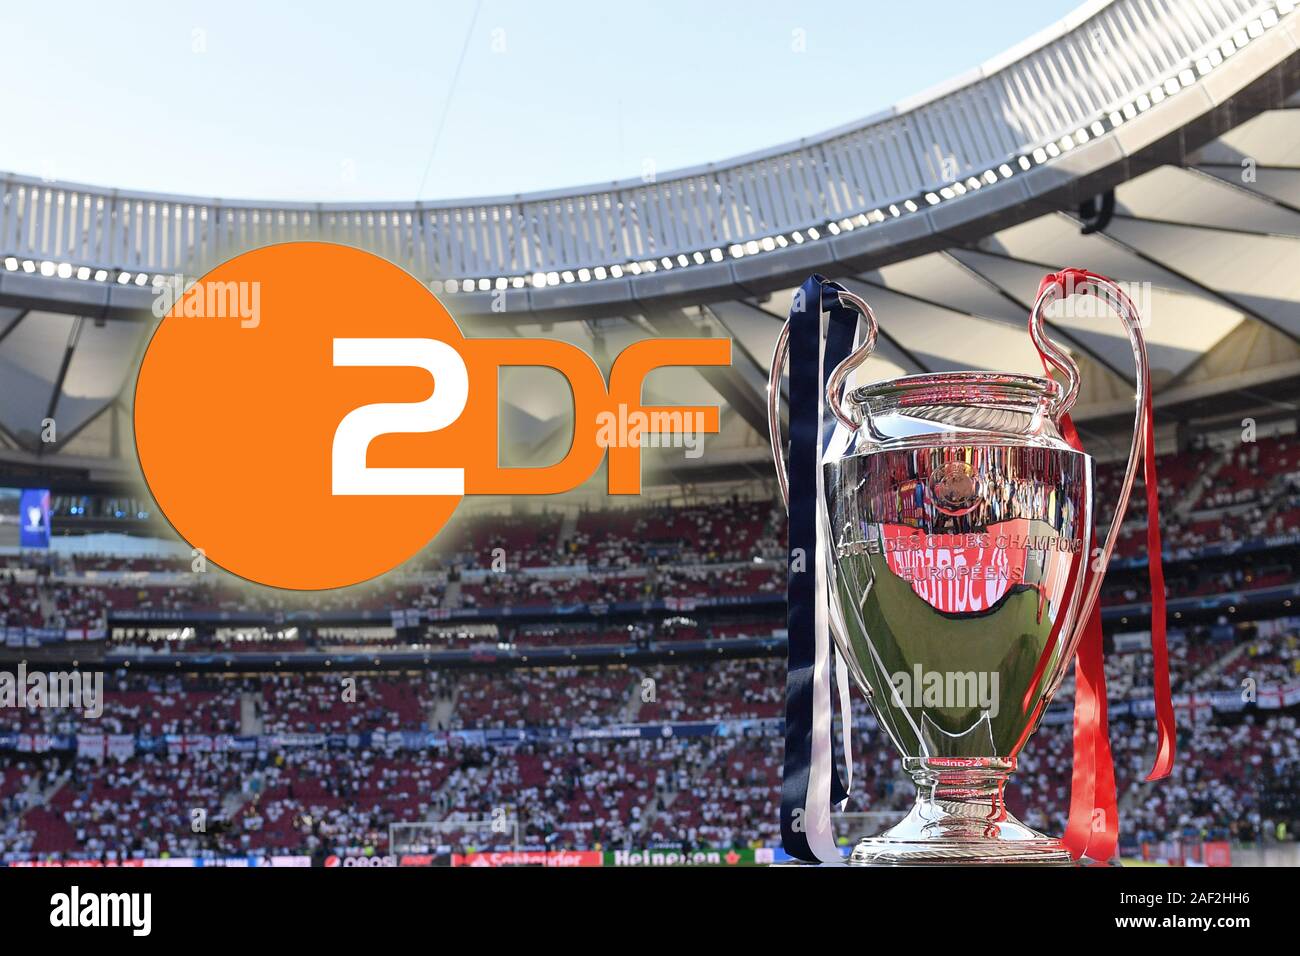 Fotomontage Champions League Final From 21 Back On Zdf In Free Tv Archive Photo Cup Cup Trophy Objective Football Champions League Final 19 Tottenham Hotspur Liverpool Fc 0 2 Season18 19 At